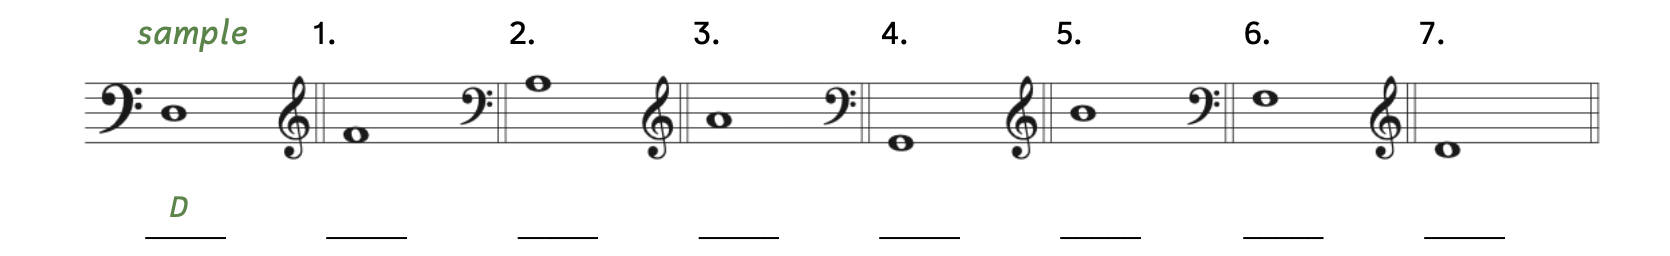 Exercise asking to identify pitches in both treble clef and bass clef. The sample is on the third line in bass clef. The sample's answer is D. Number 1 is in the first space in treble clef. Number 2 is on the fifth line in bass clef. Number 3 is in the second space in treble clef. Number 4 is on the first line in bass clef. Number 5 is on the third line in treble clef. Number 6 is on the fourth line in bass clef. Number 7 is in the space below the staff in treble clef.